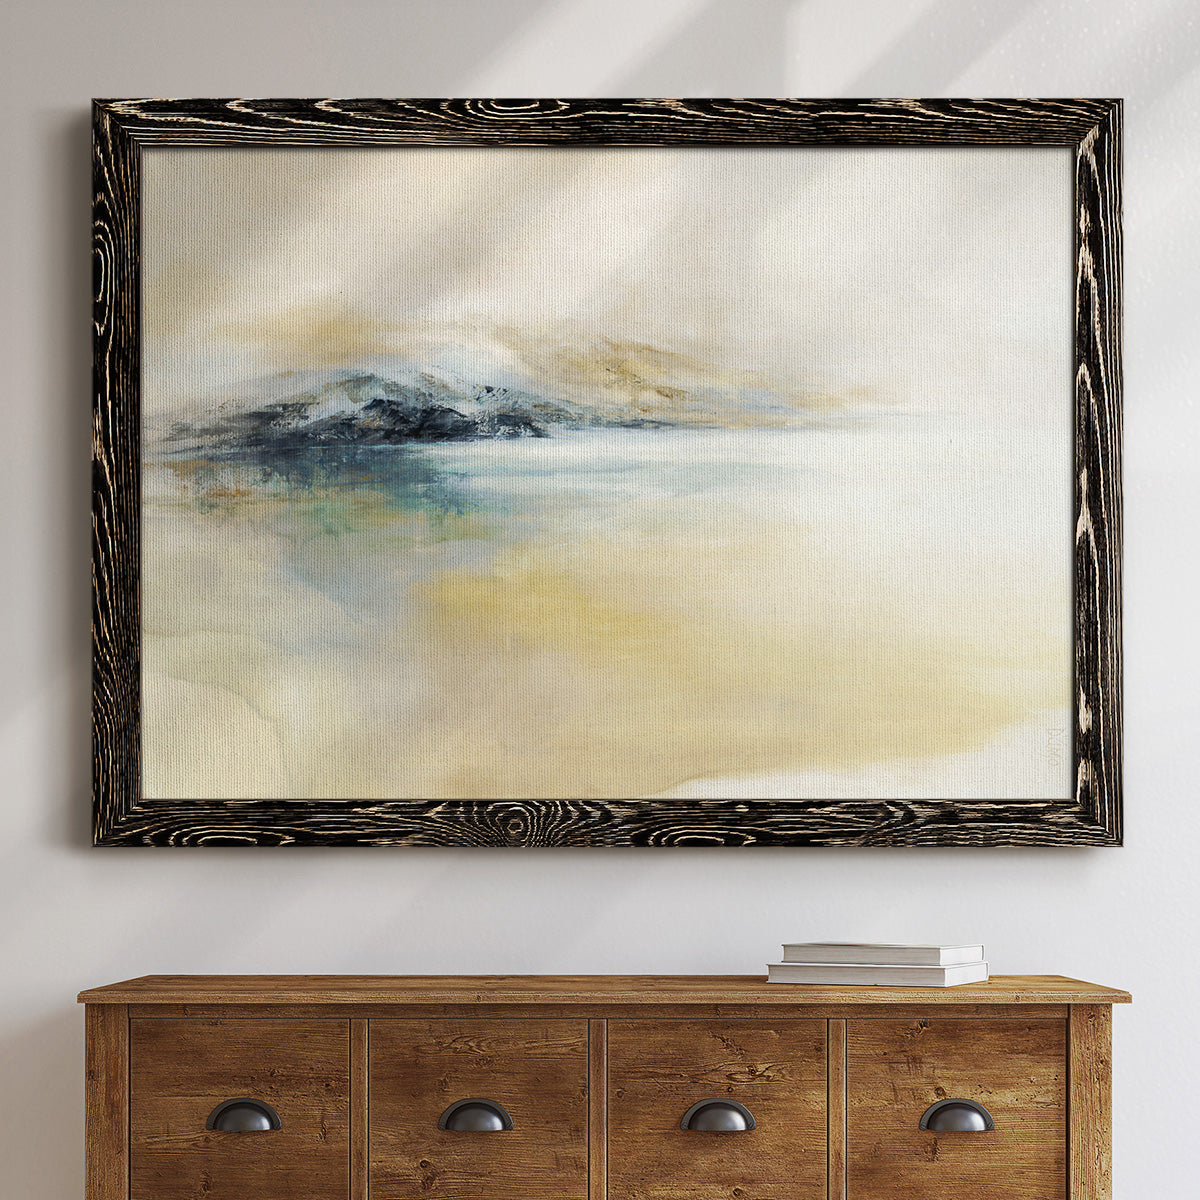 Lost In Thought-Premium Framed Canvas - Ready to Hang